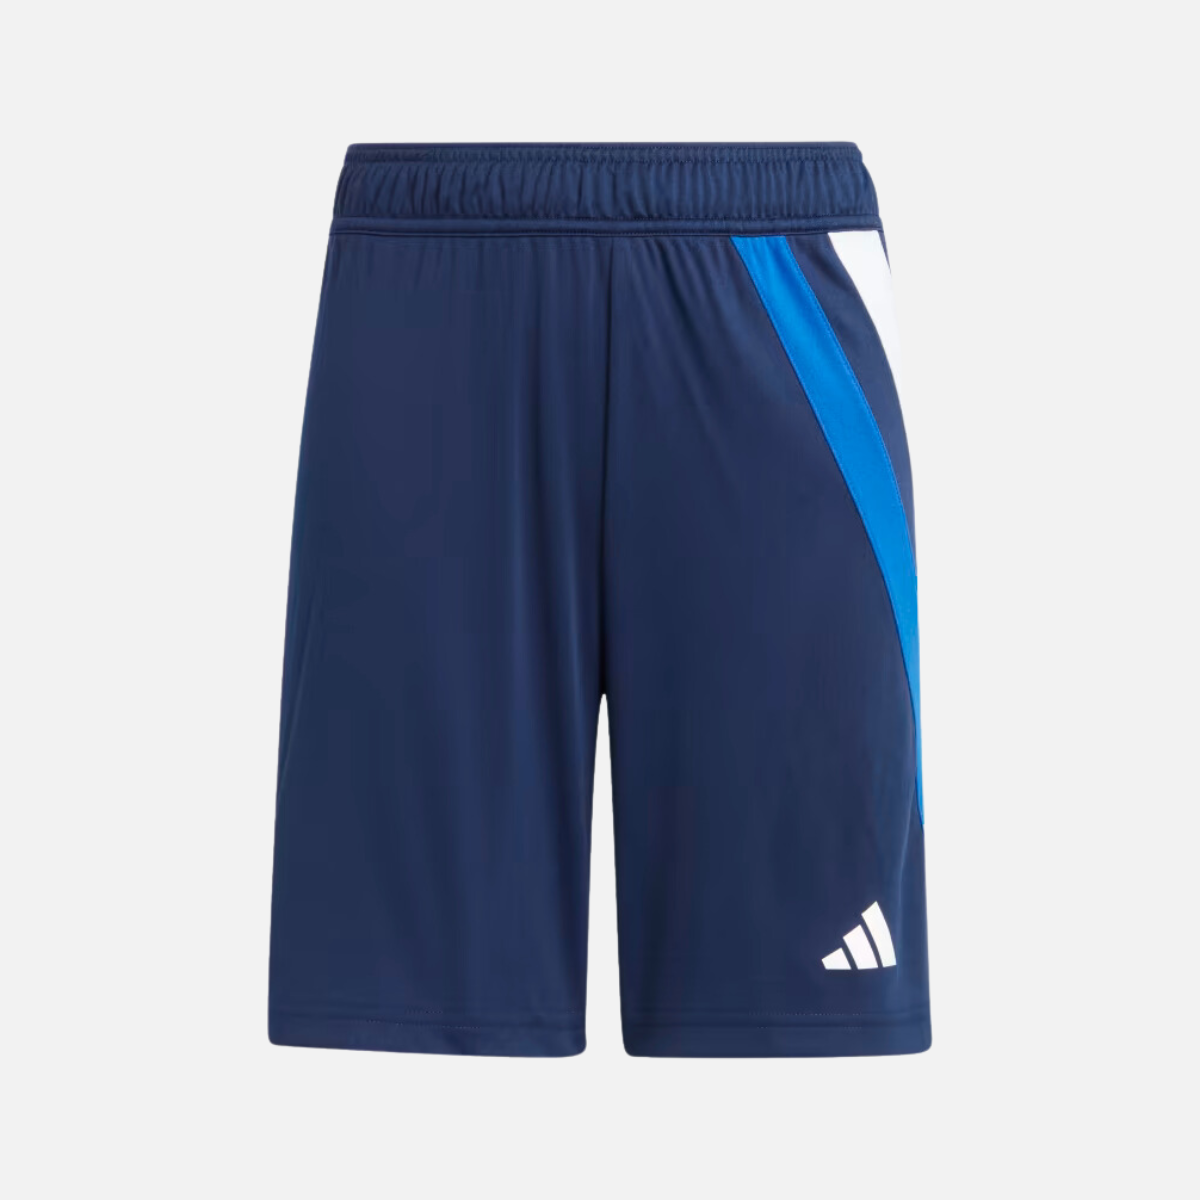 Adidas Fortore 23 Kids Unisex Football Shorts (5-16 Years) -Navy Blue 2/Team Collegiate Red/White/Royal Blue